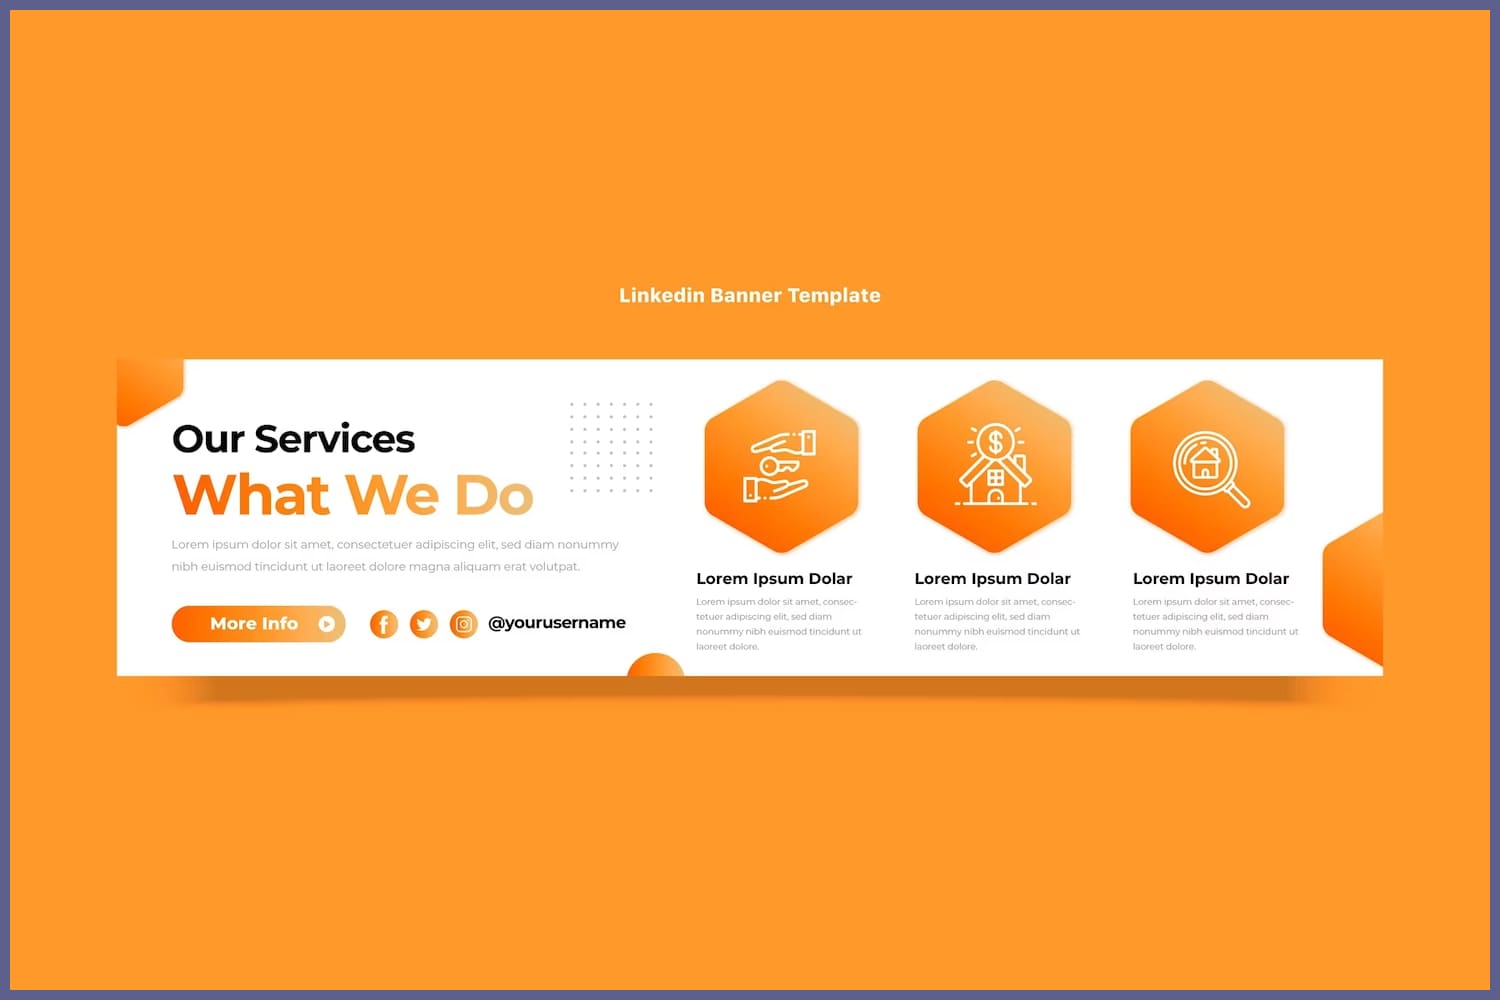 Banner for linkedin with a list of services, icons and text on a white background.